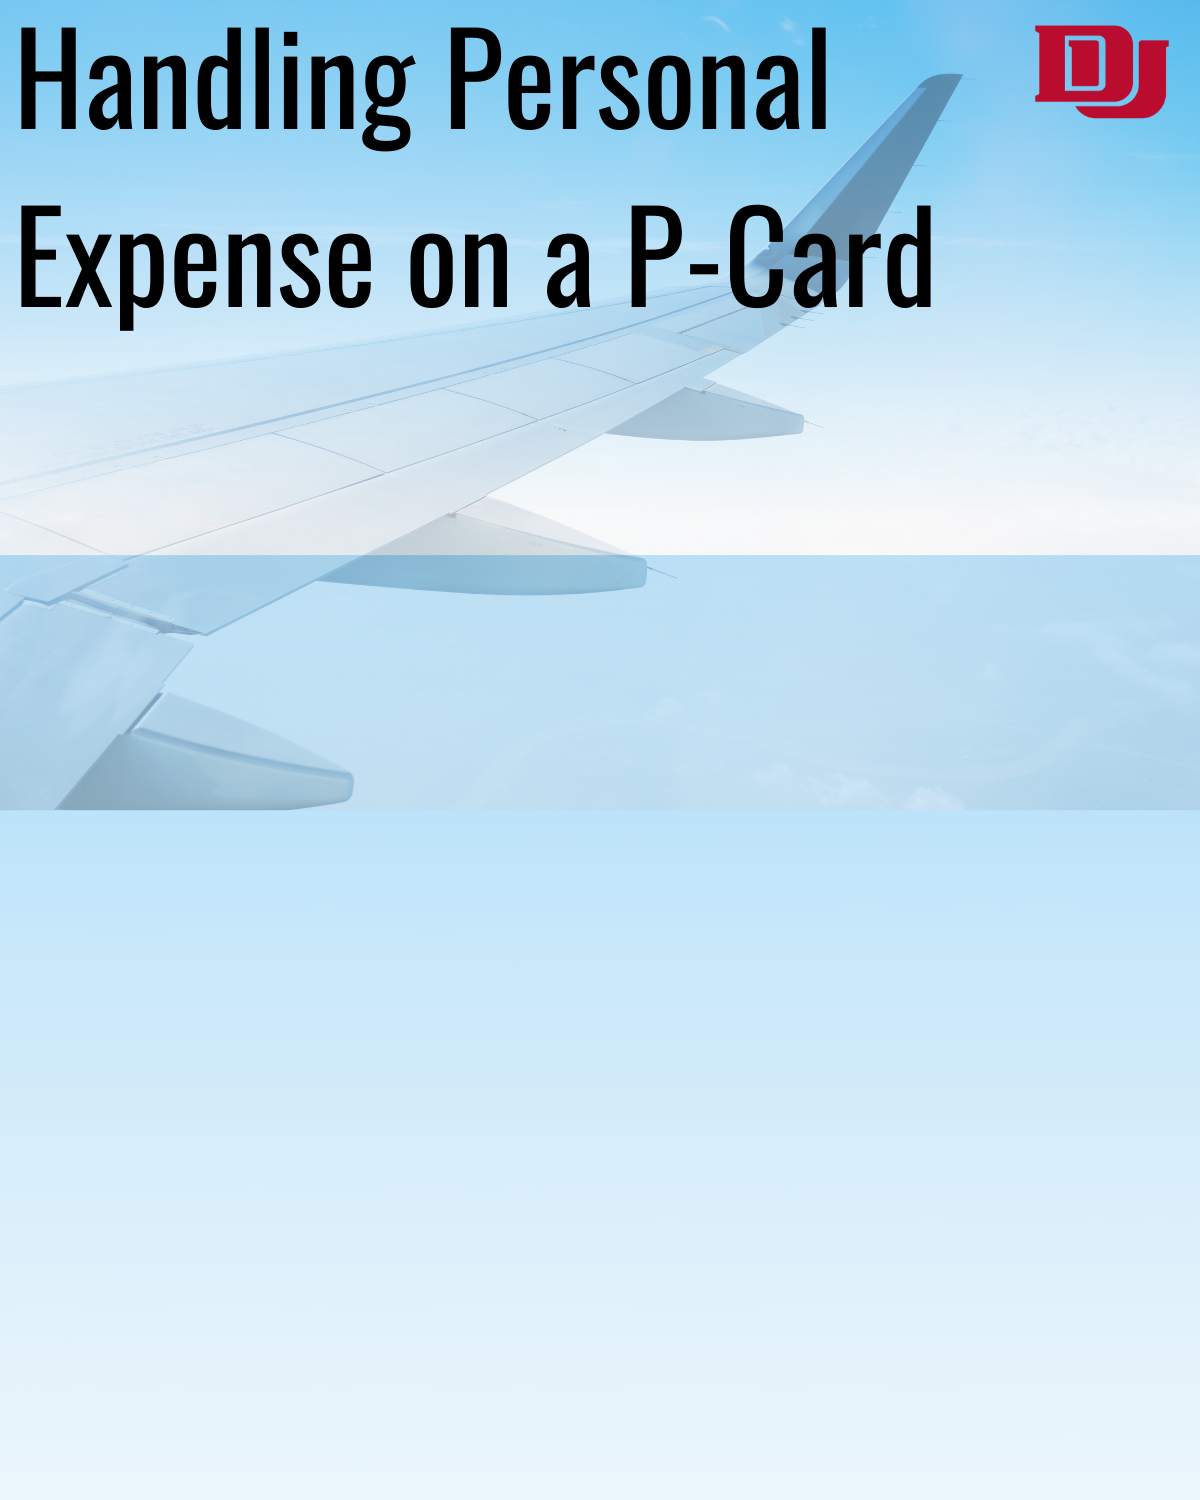 Handling a Personal Charge on a P-Card